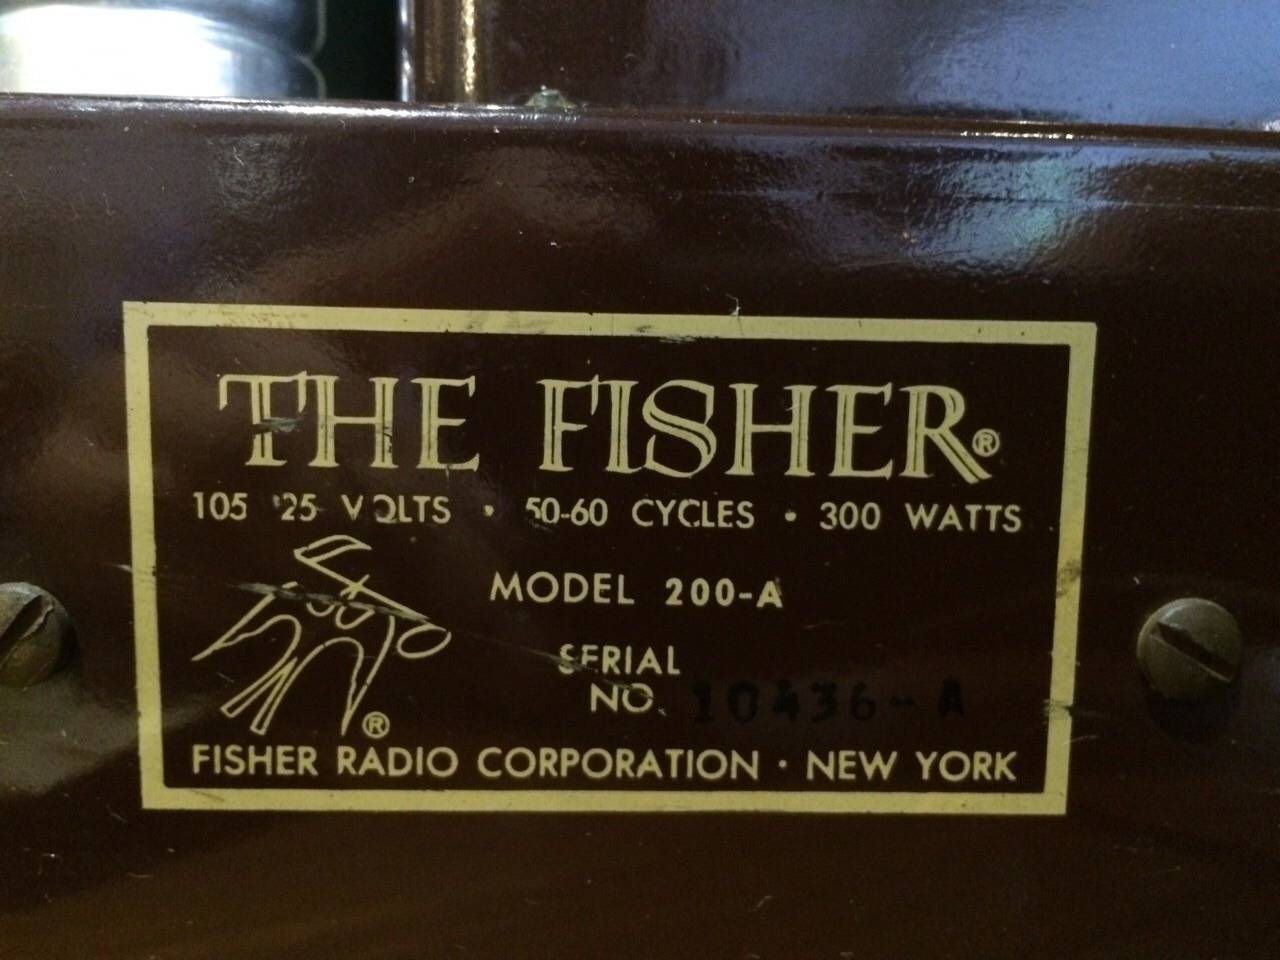 Pair of Tube Amplifiers by the Fisher 4